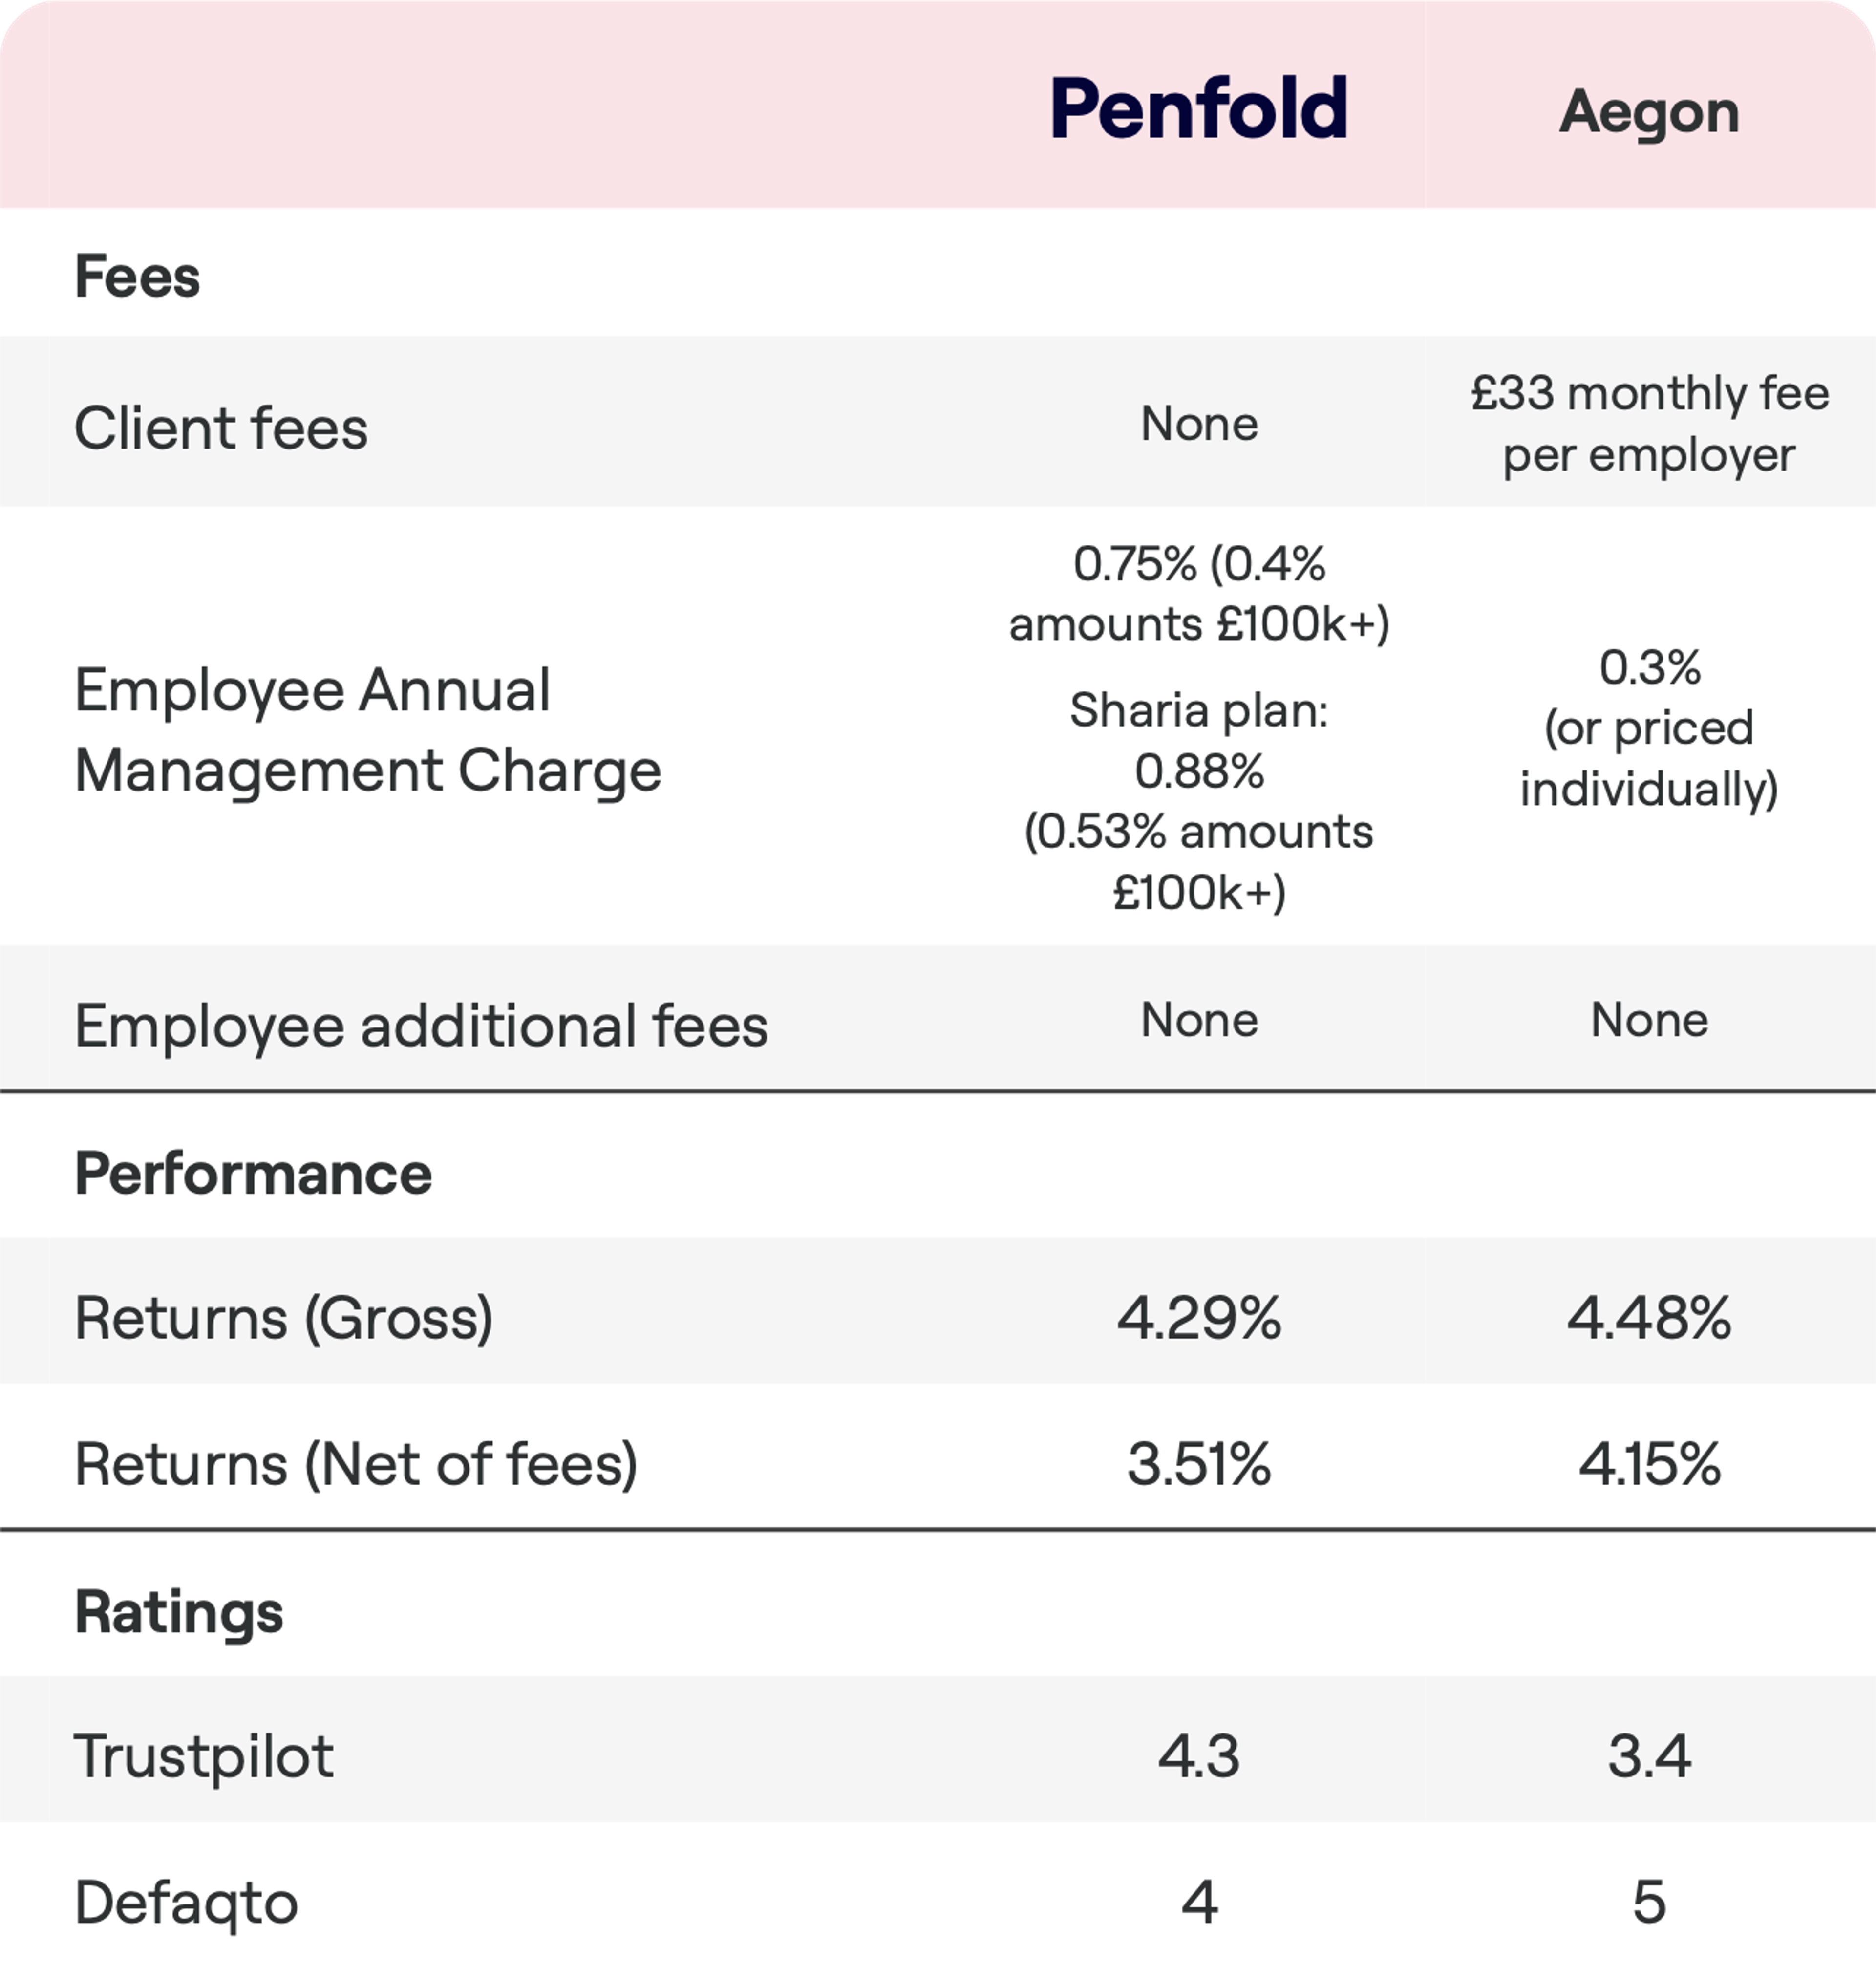 A comparison chart of fees, performance, and ratings between Penfold and Aegon pensions. Penfold has no client fees, an Employee Annual Management Charge of 0.75% (0.4% for amounts over £100k), and for the Sharia plan, 0.88% (0.53% for amounts over £100k). Aegon charges a £33 monthly fee per employer and a 0.3% Employee Annual Management Charge (or priced individually). Both have no additional employee fees. Penfold's gross returns are 4.29% and net returns are 3.51%, while Aegon shows higher gross returns at 4.48% and net returns at 4.15%. Trustpilot rates Penfold at 4.3 and Aegon at 3.4. Defaqto rates Penfold 4 stars and Aegon 5 stars.